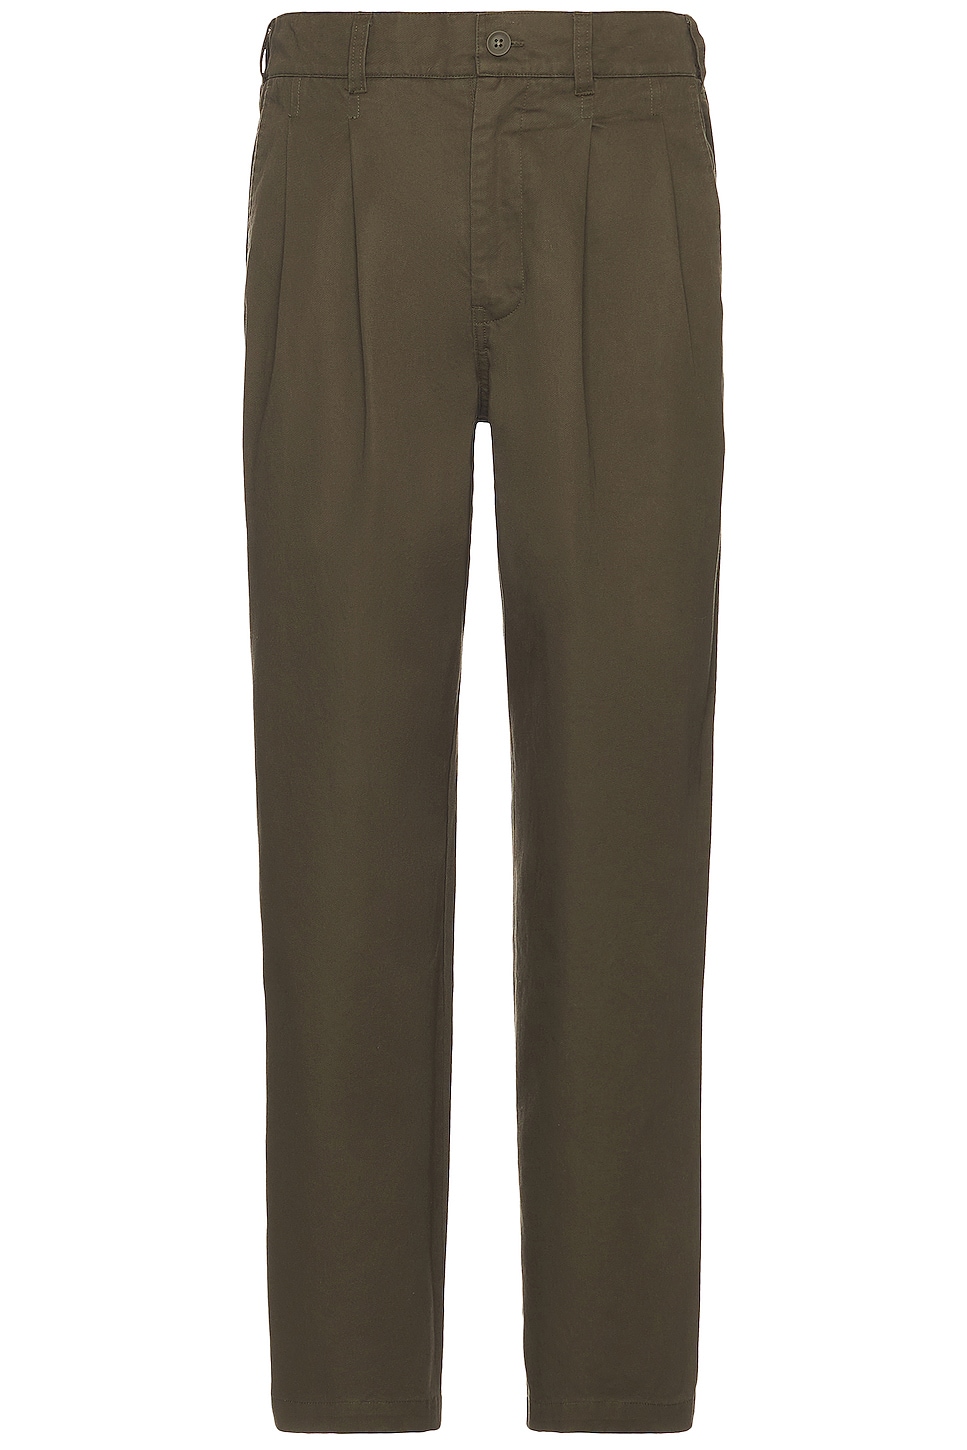 Double Pleated Chino Pant in Olive